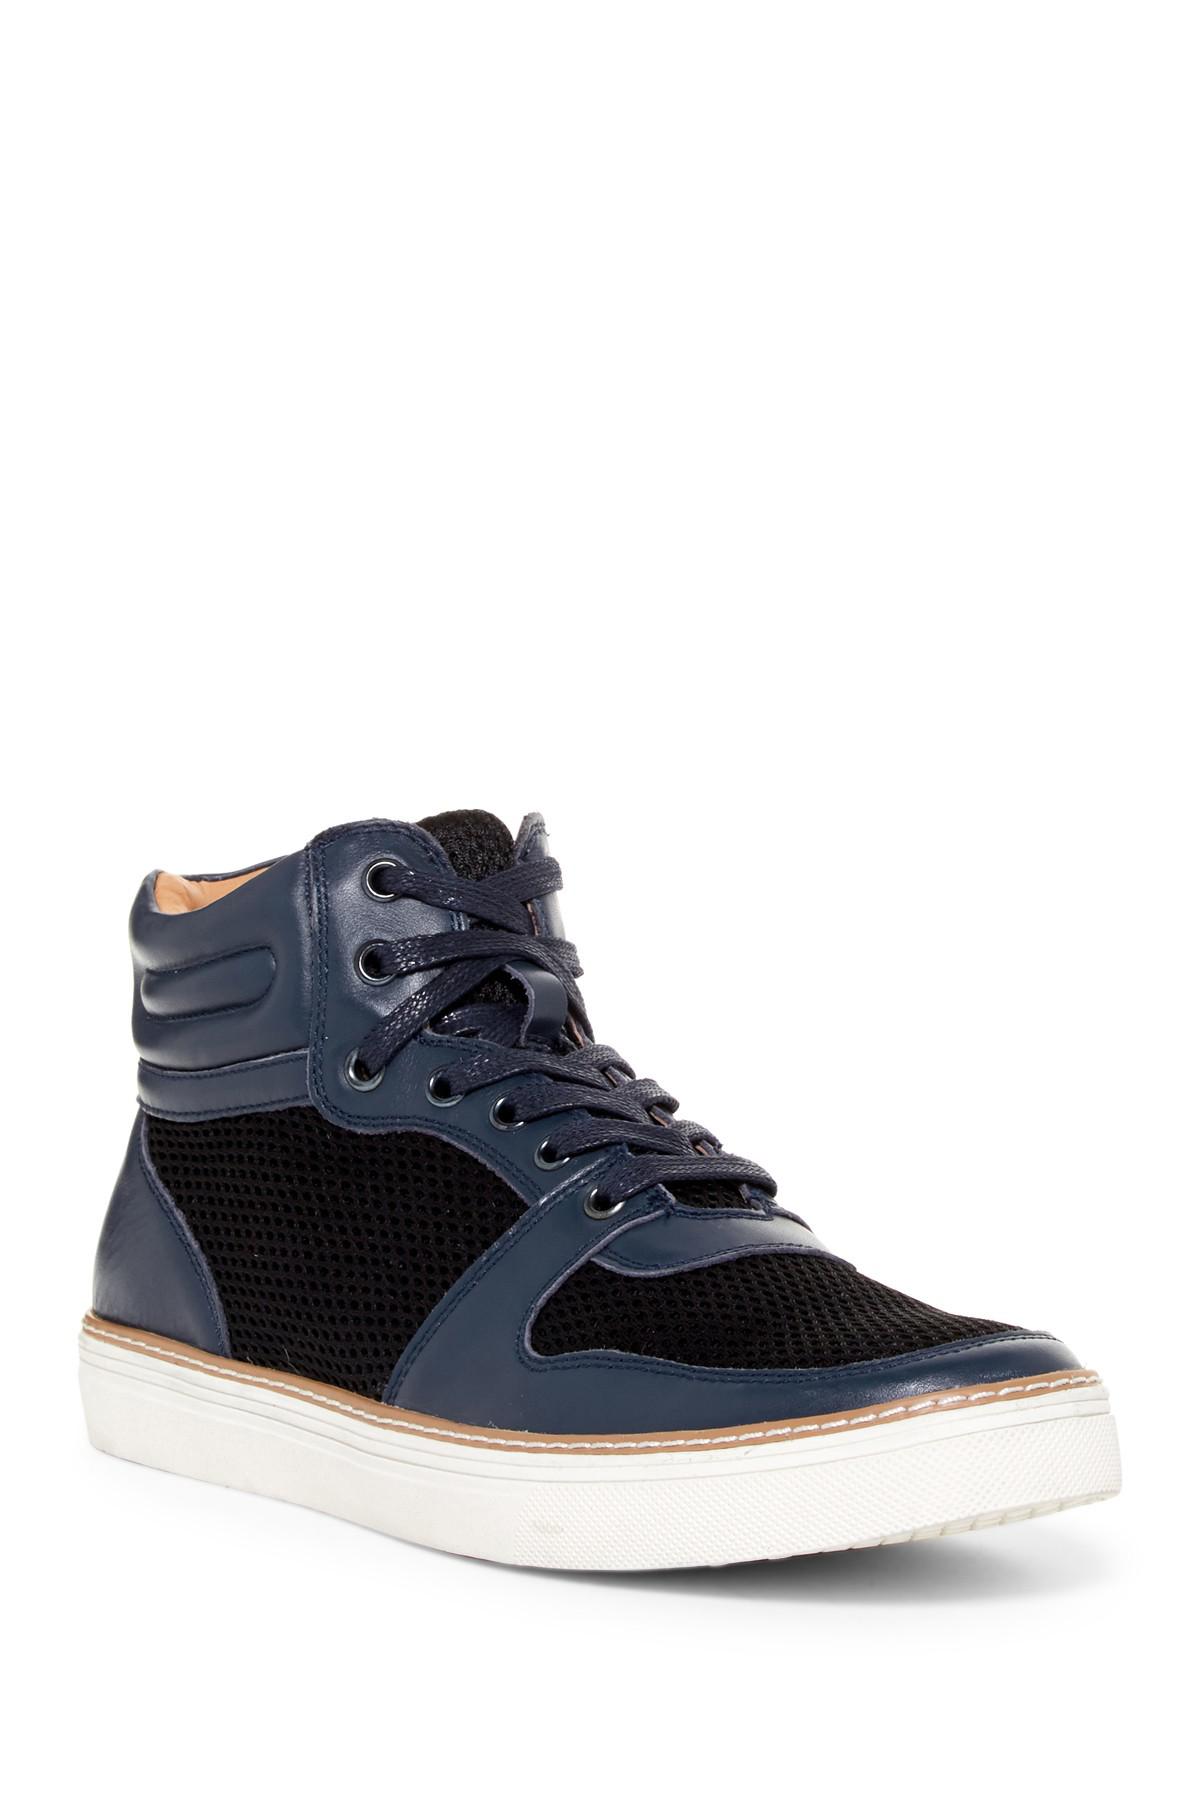 English Laundry Leather Preston Hi-top Sneaker in Navy (Blue) for Men ...